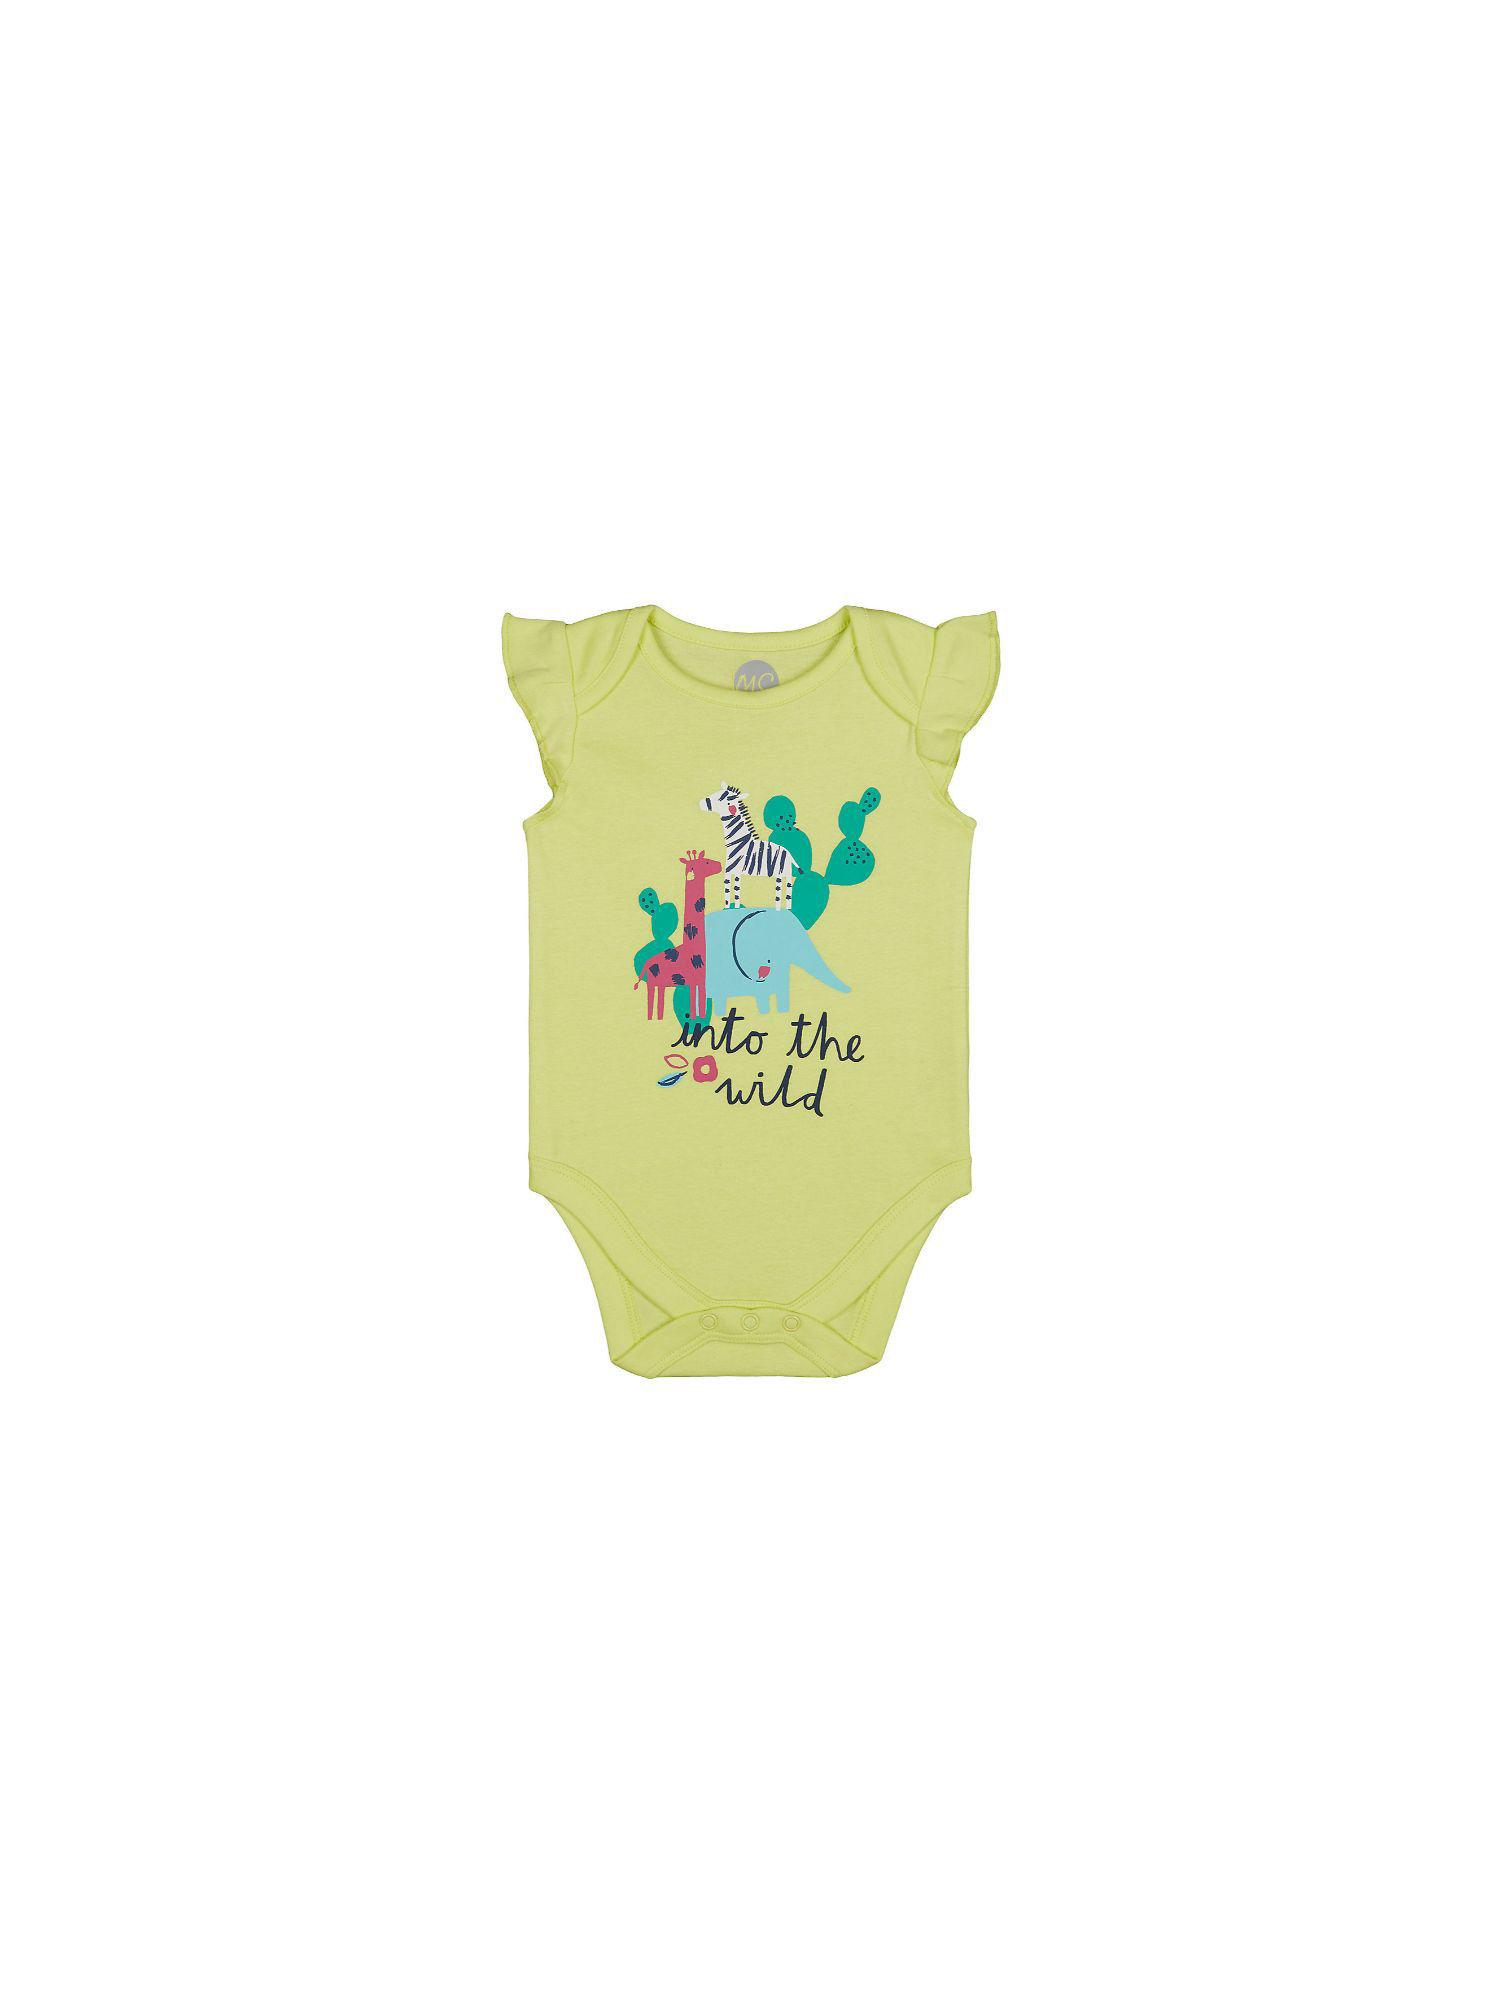 mother-care-nb-yellow-frill-anim-romper